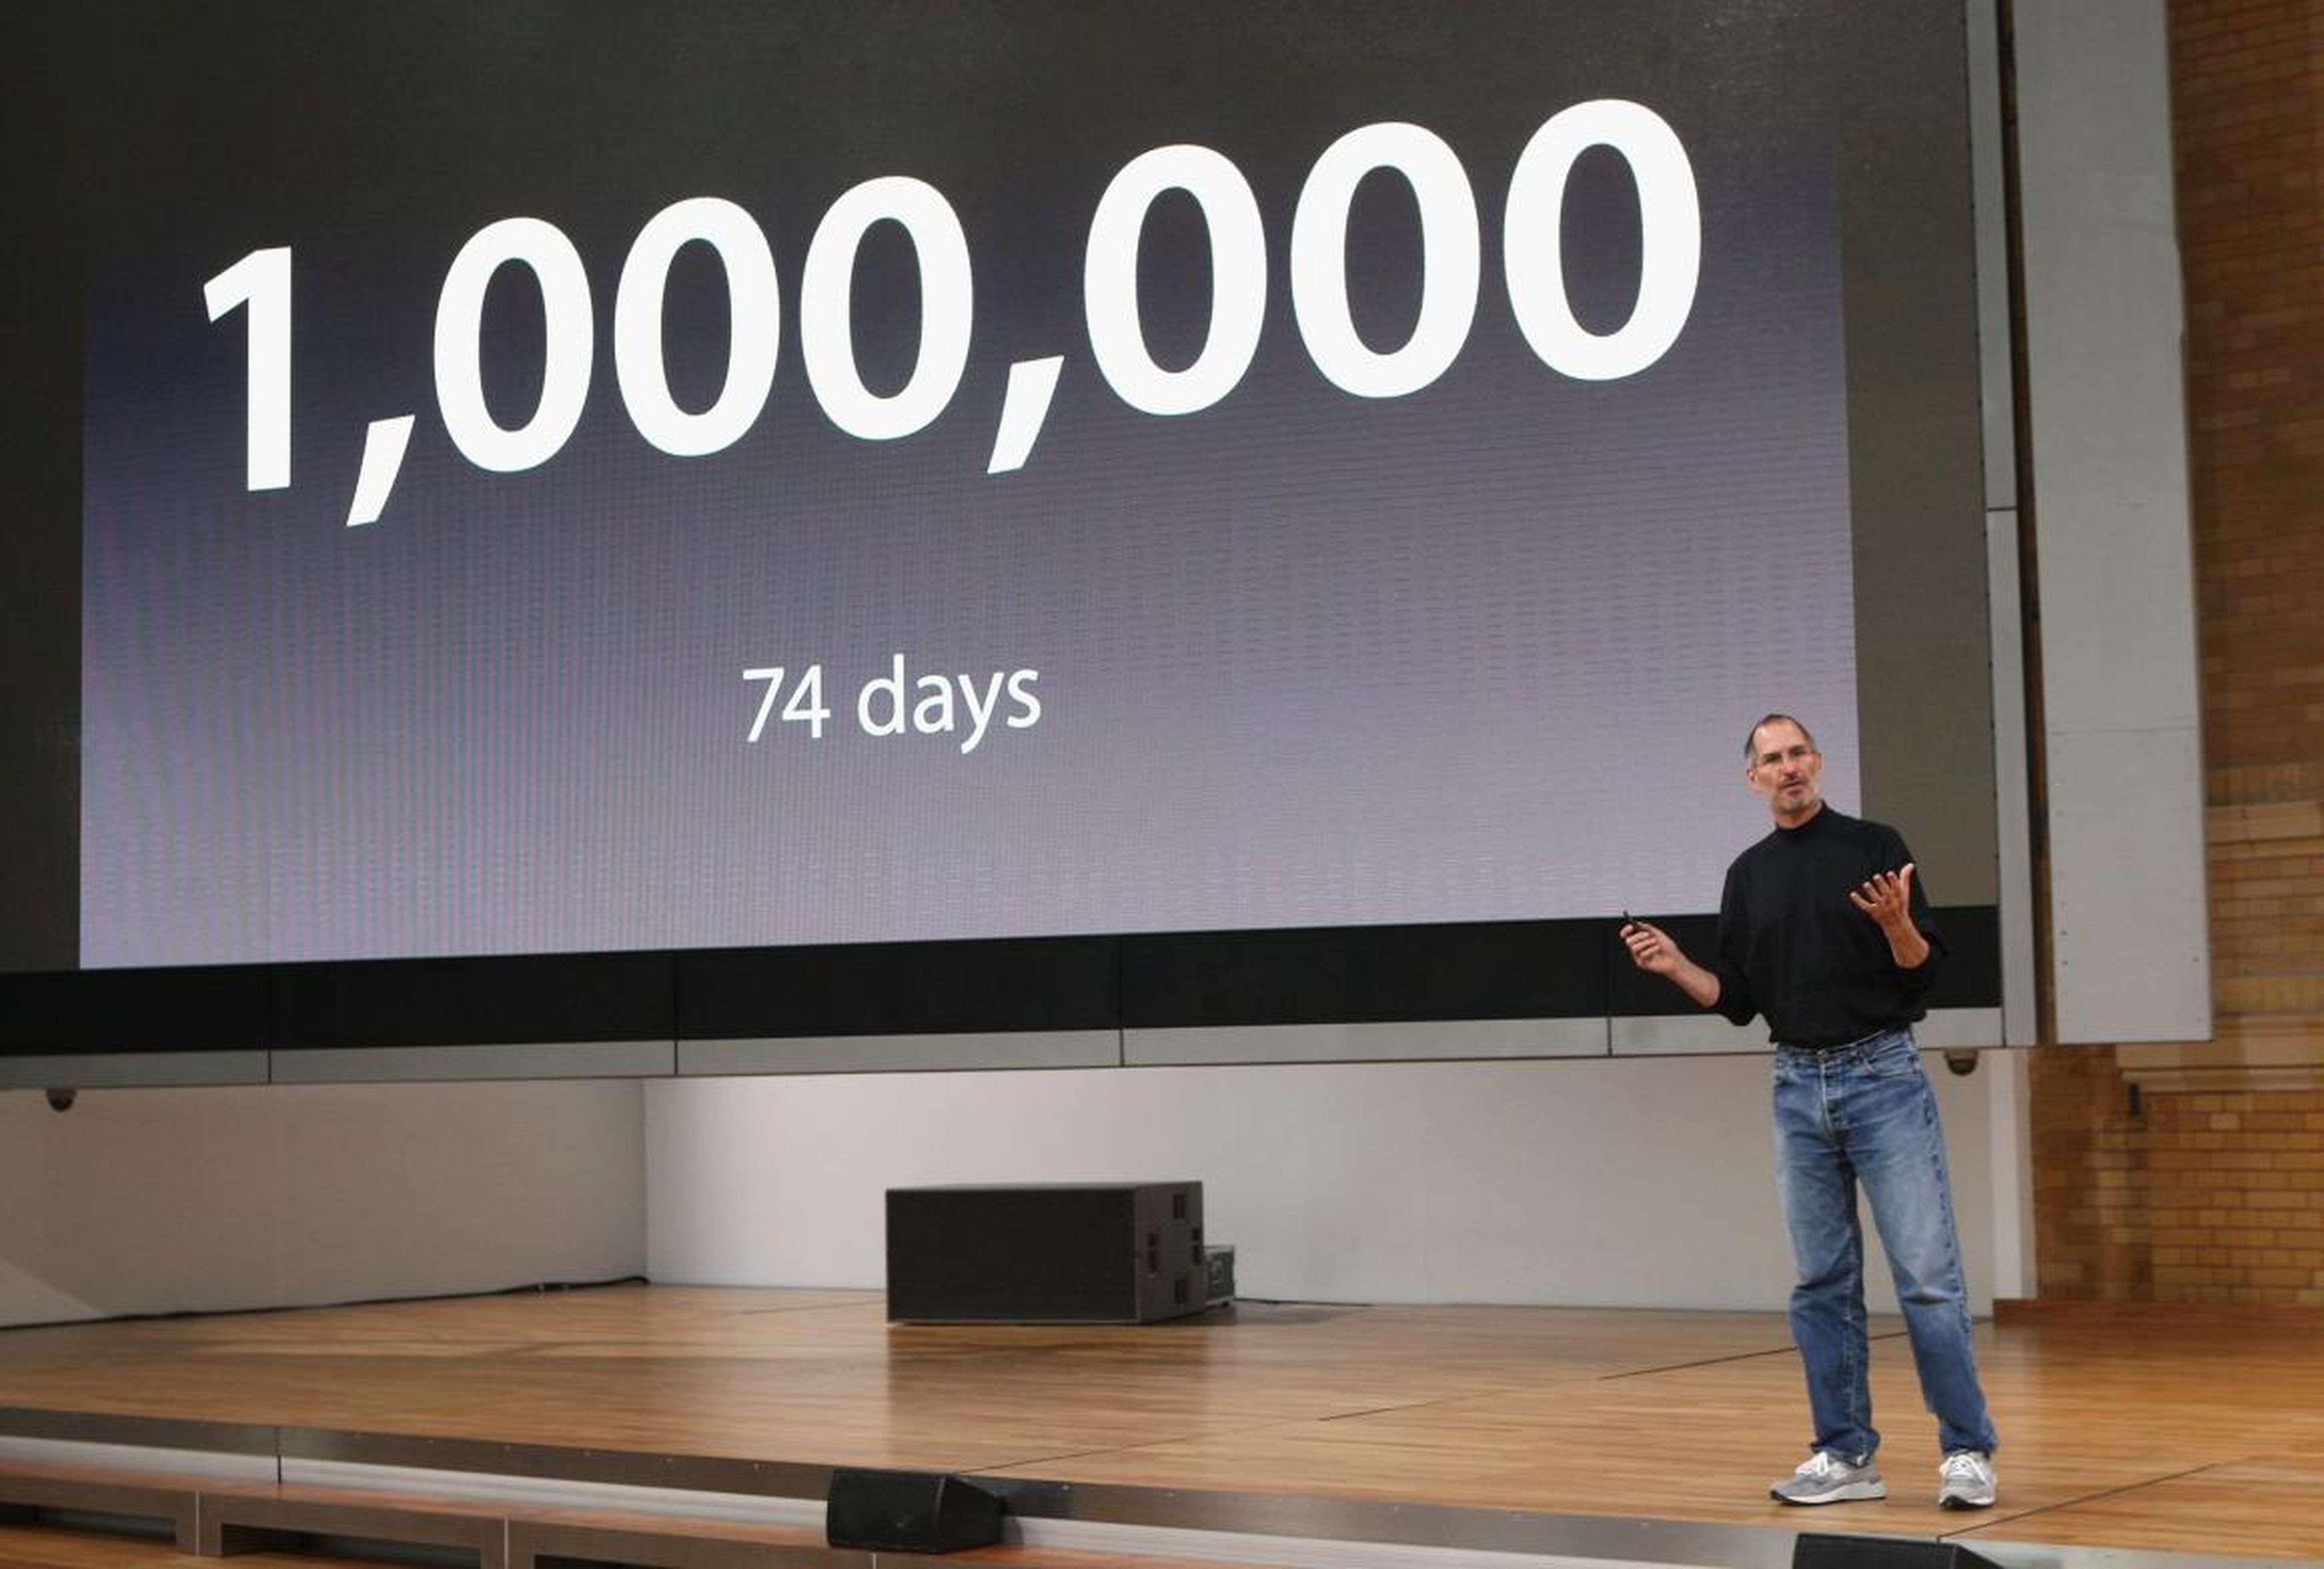 The iPhone was a massive hit, taking only 74 days from its August 2007 launch to sell a million units.